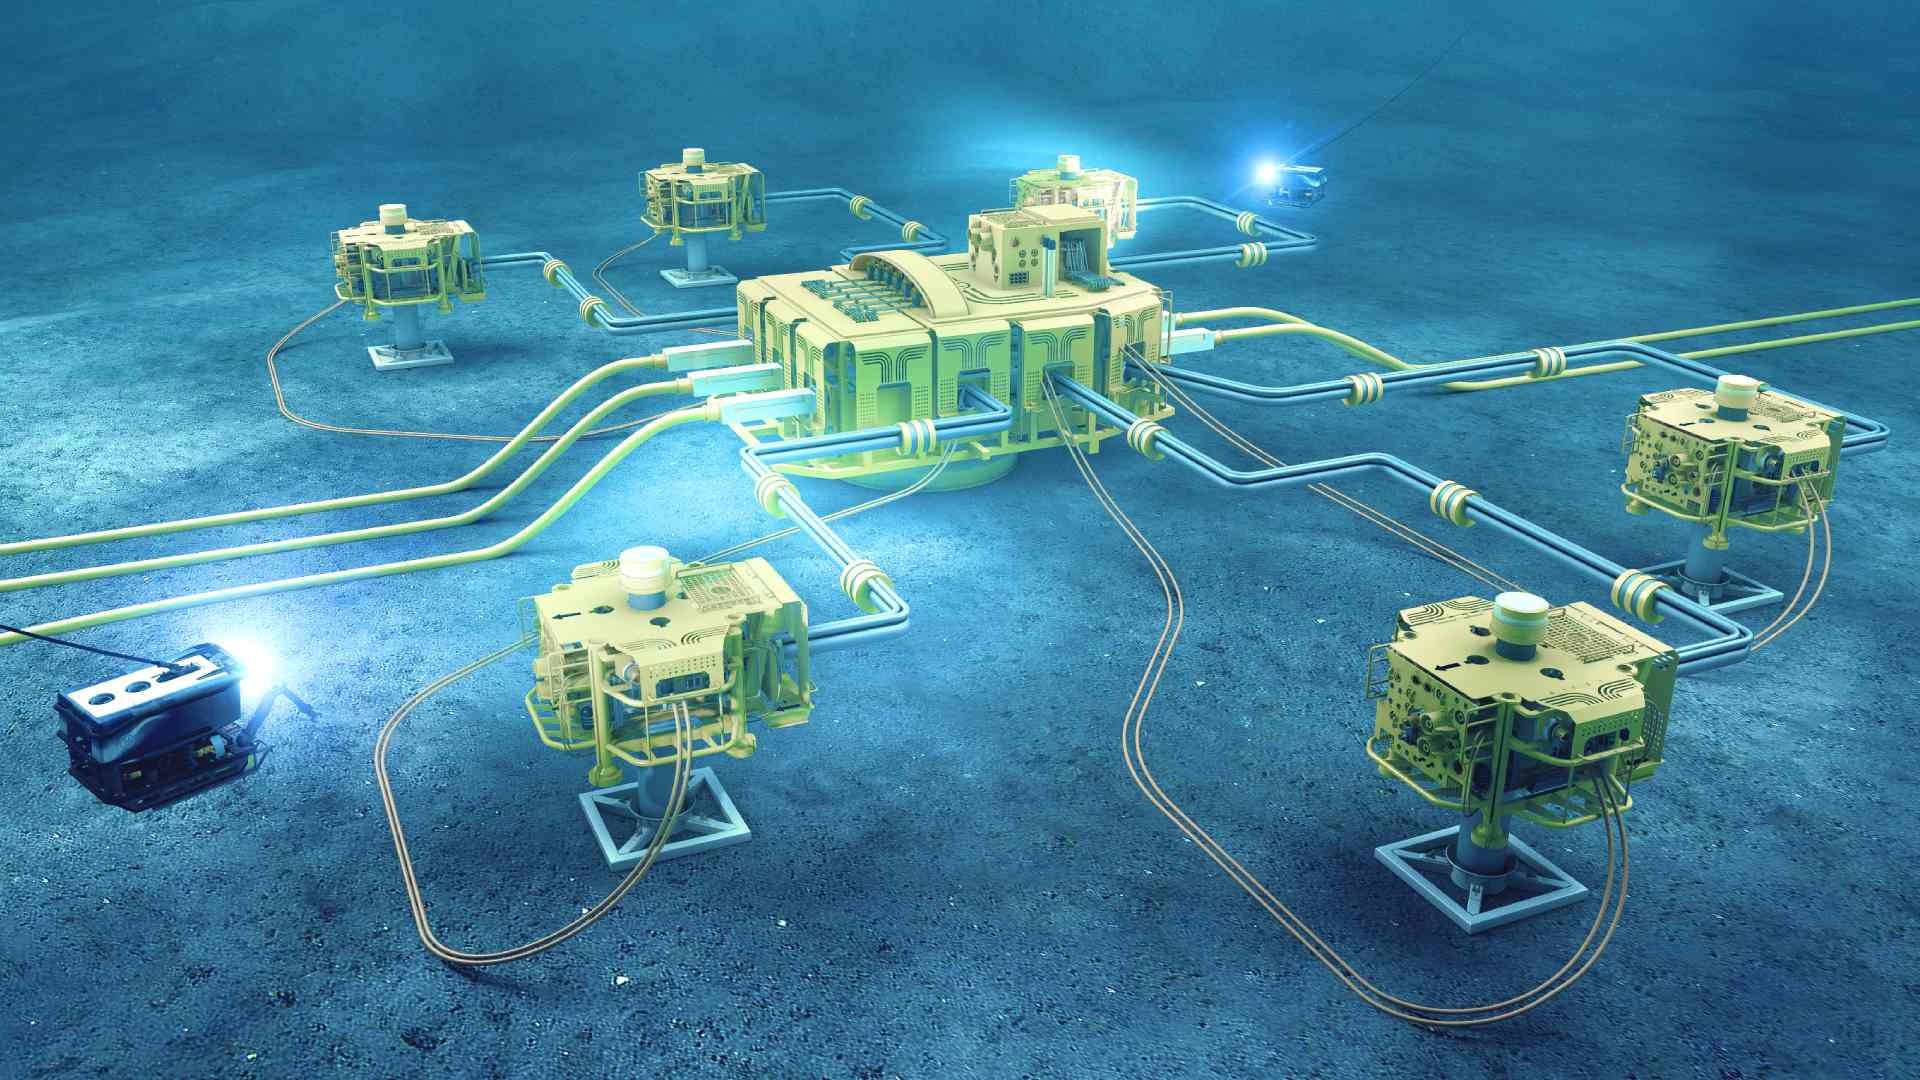 subsea-all-electric-is-here-to-stay-1920x1080_tcm78-162596.jpg